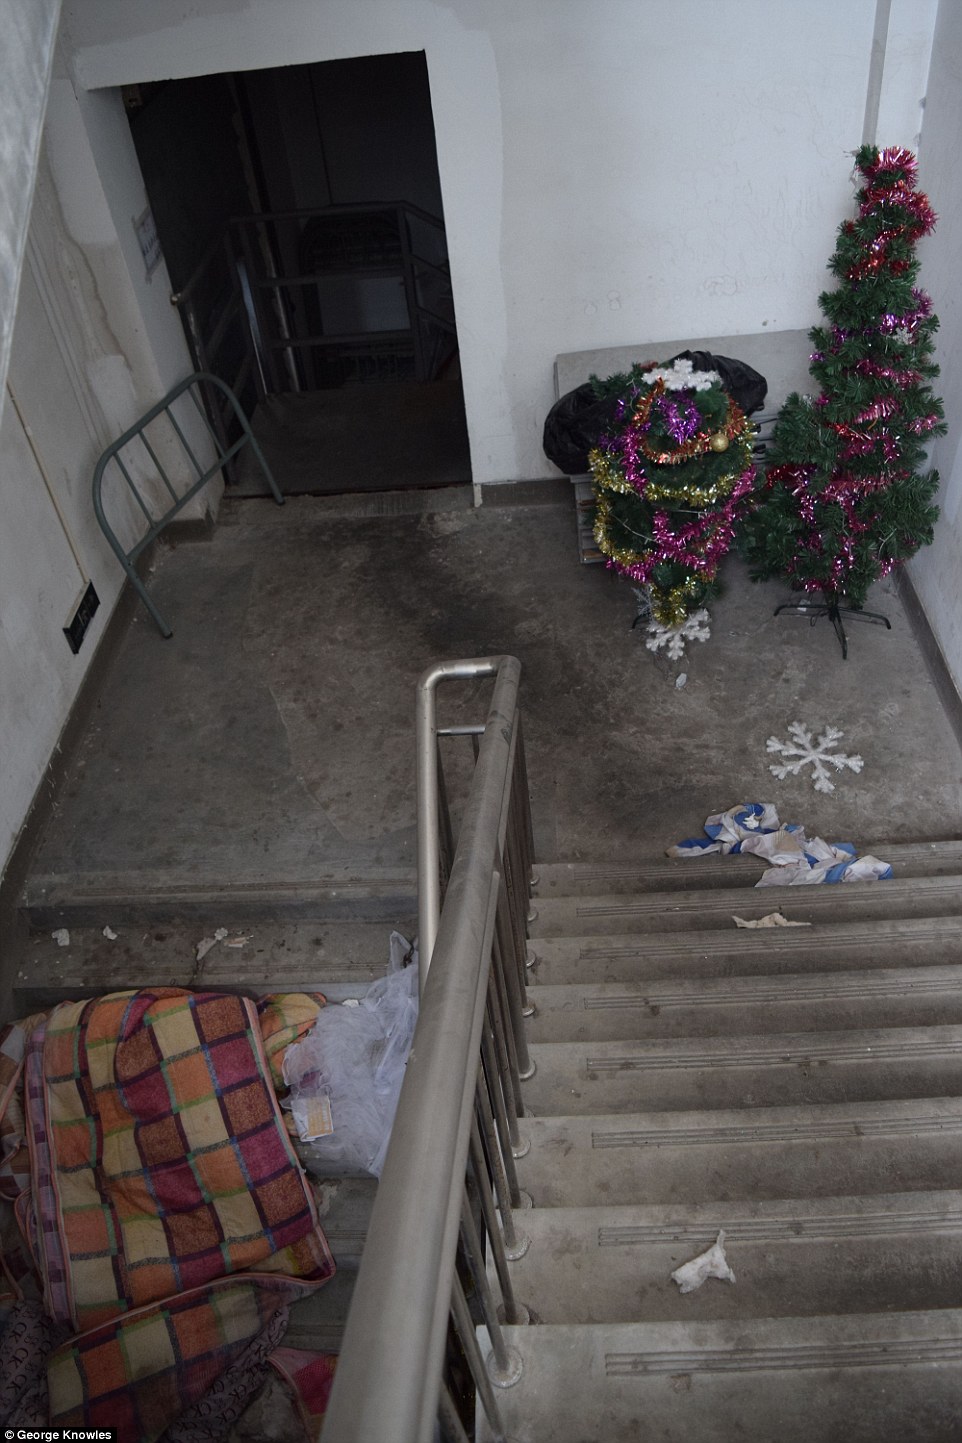 Rushed exit: Workers appear to have left the dorms in a hurry as possessions were abandoned throughout the building, and this deserted stairwell with its pathetic tree shows how workers tried to make their living quarters more homely 